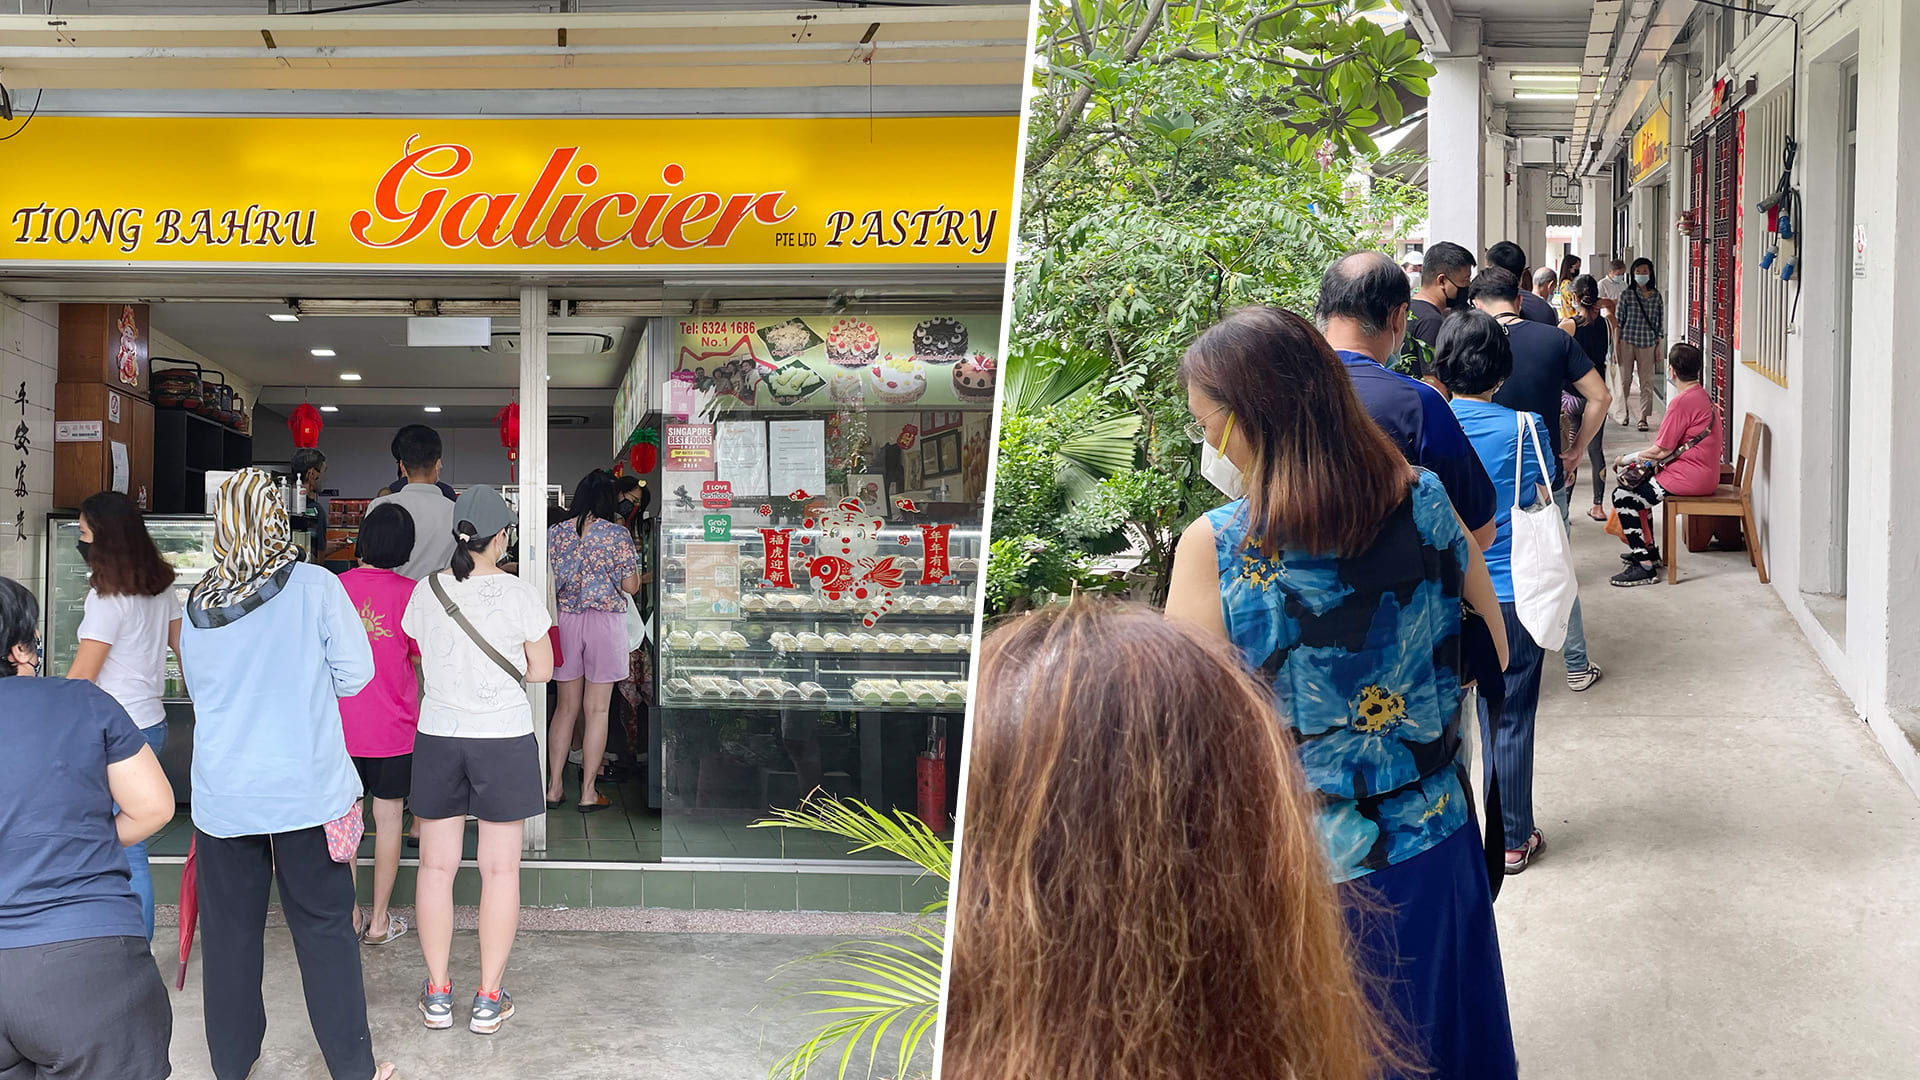   Popular Tiong Bahru Galicier Pastry Sees Snaking Queues On Its Last Day Of Operations Today